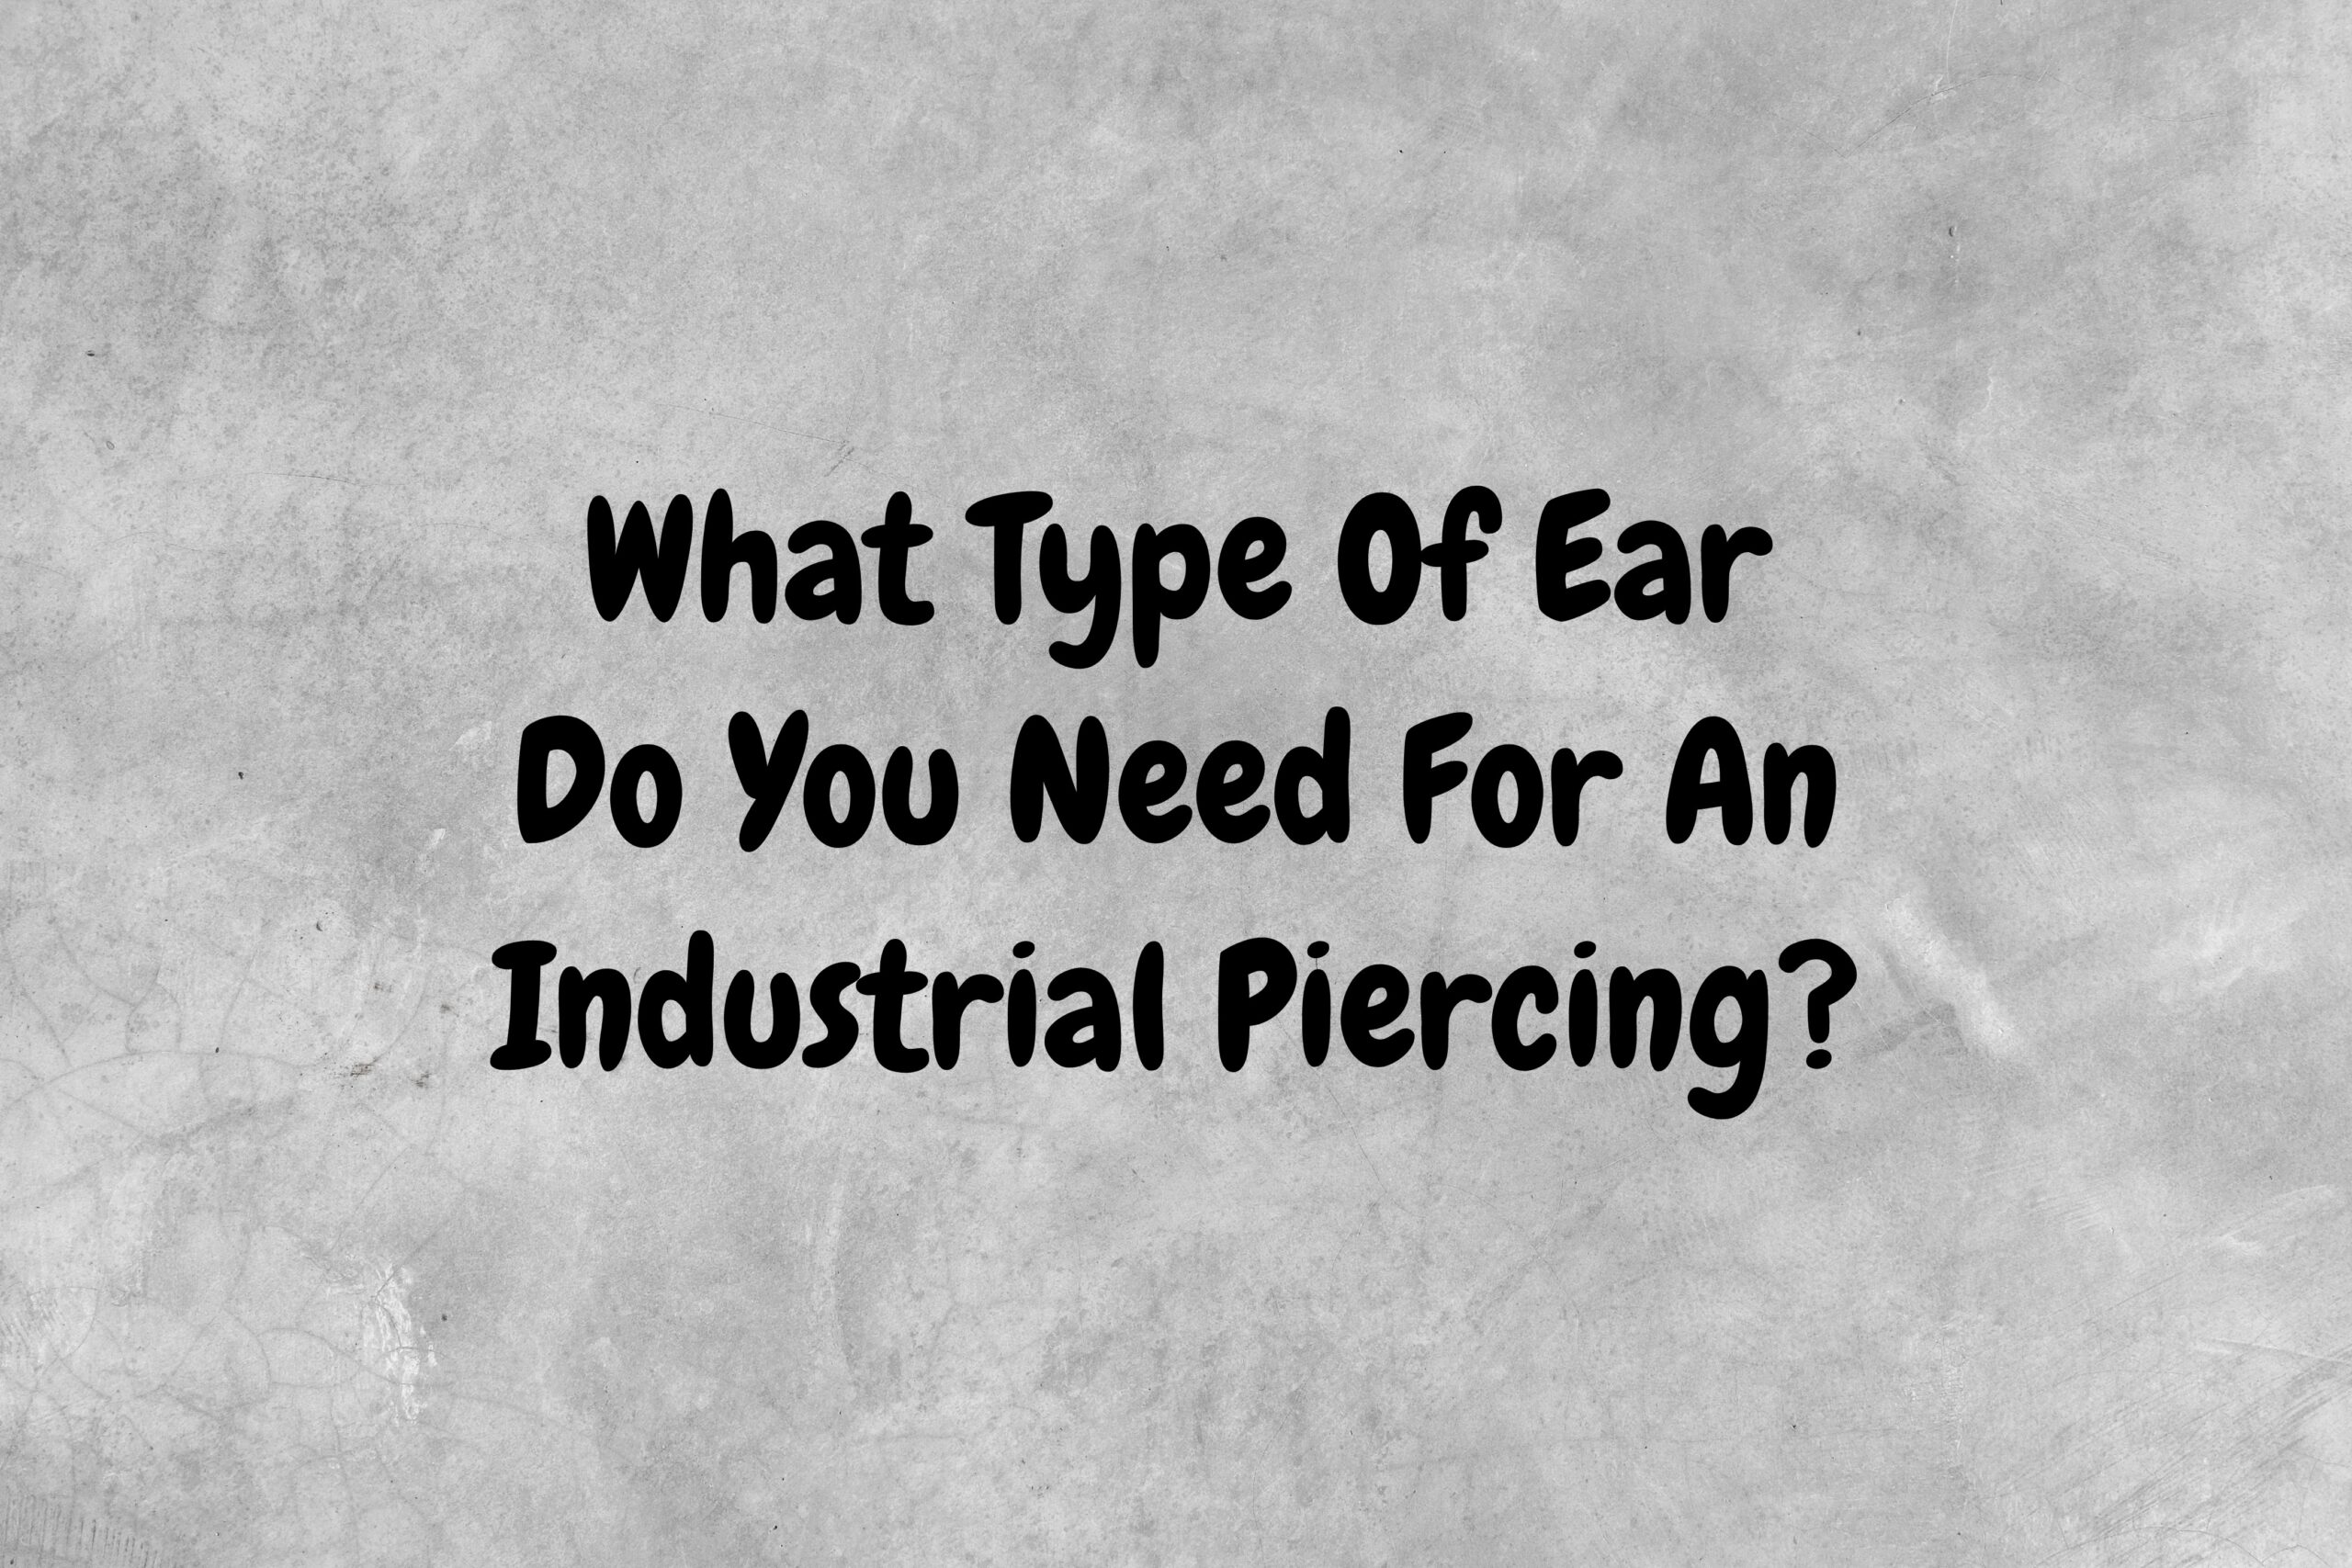 An image with a gray background and black text asking the question, "What type of ear do you need for an industrial piercing?"